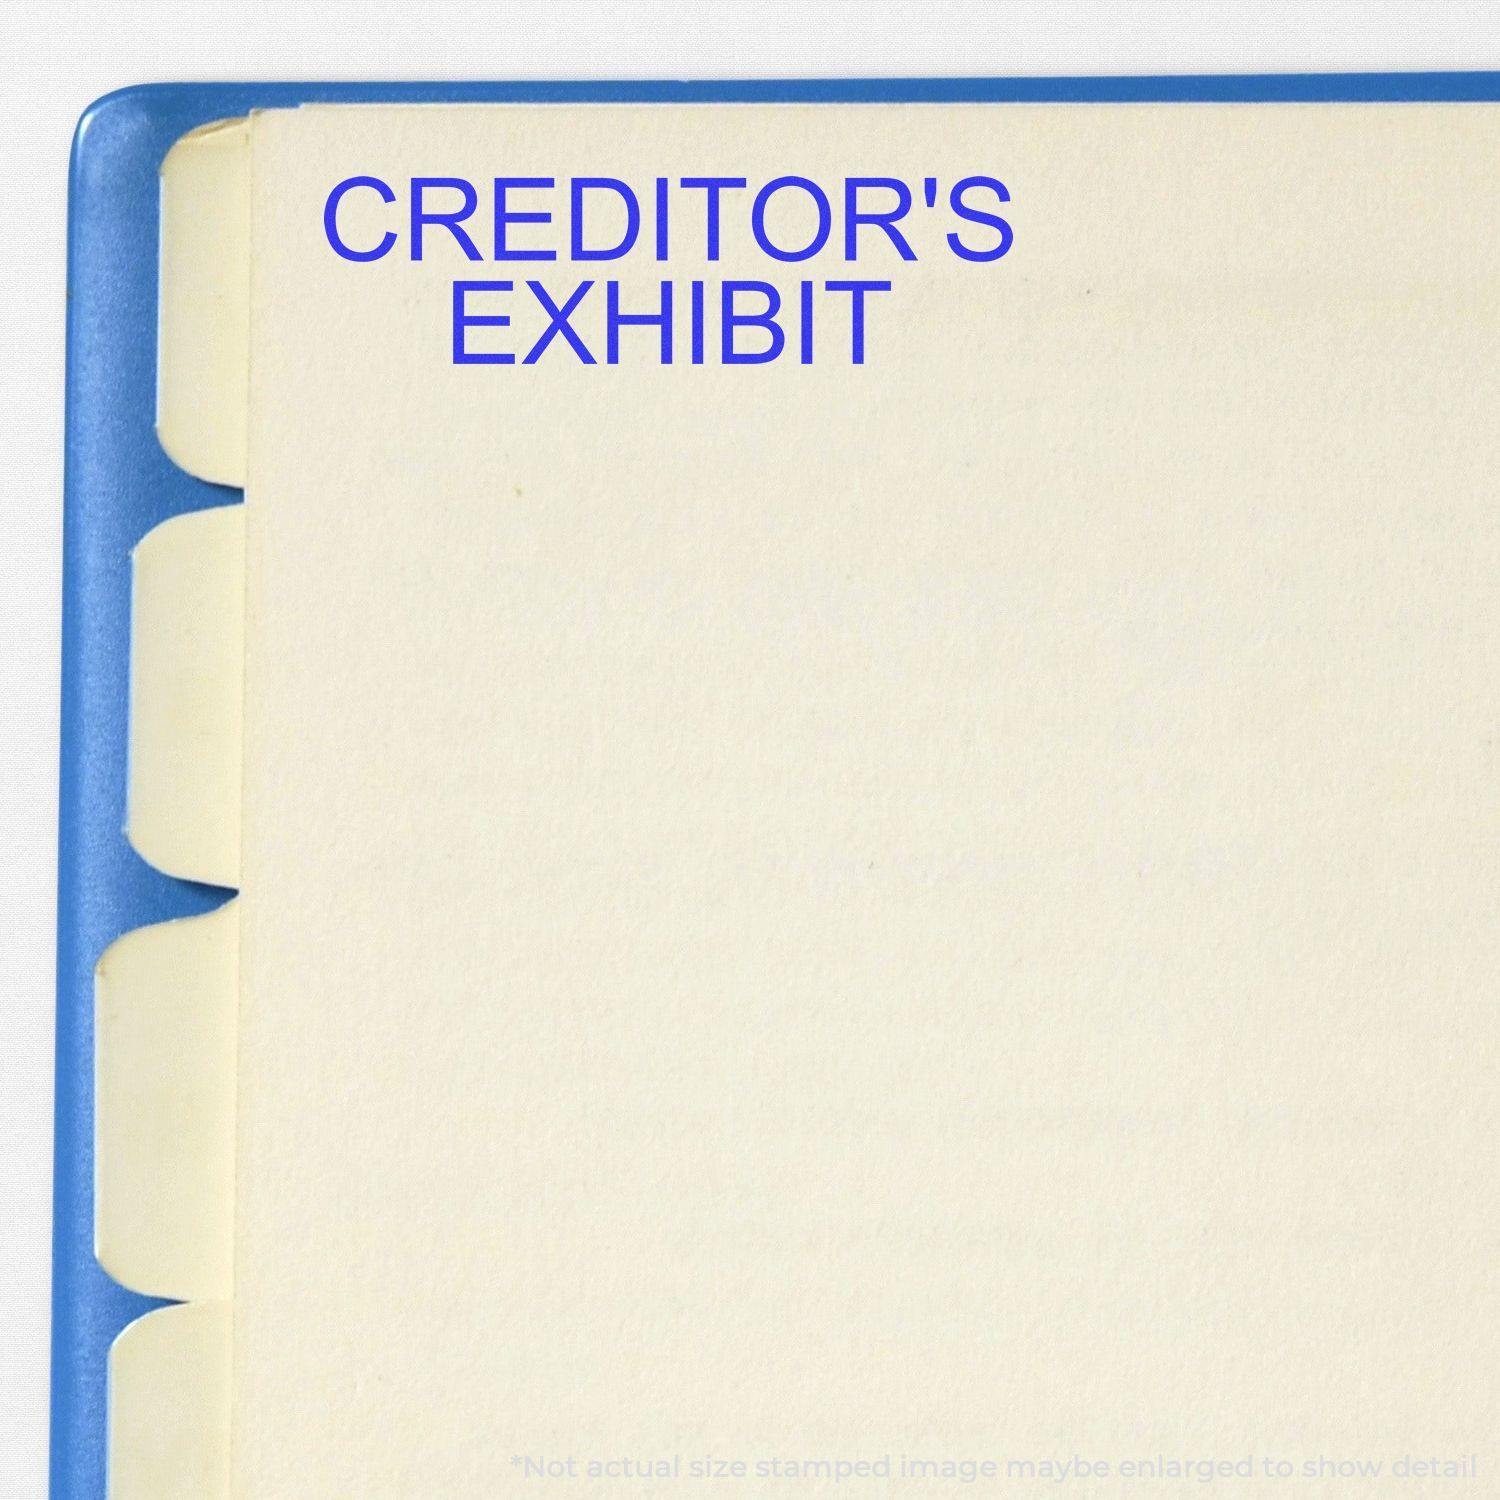 A self-inking stamp with a stamped image showing how the text "CREDITOR'S EXHIBIT" in a large bold font is displayed by it.